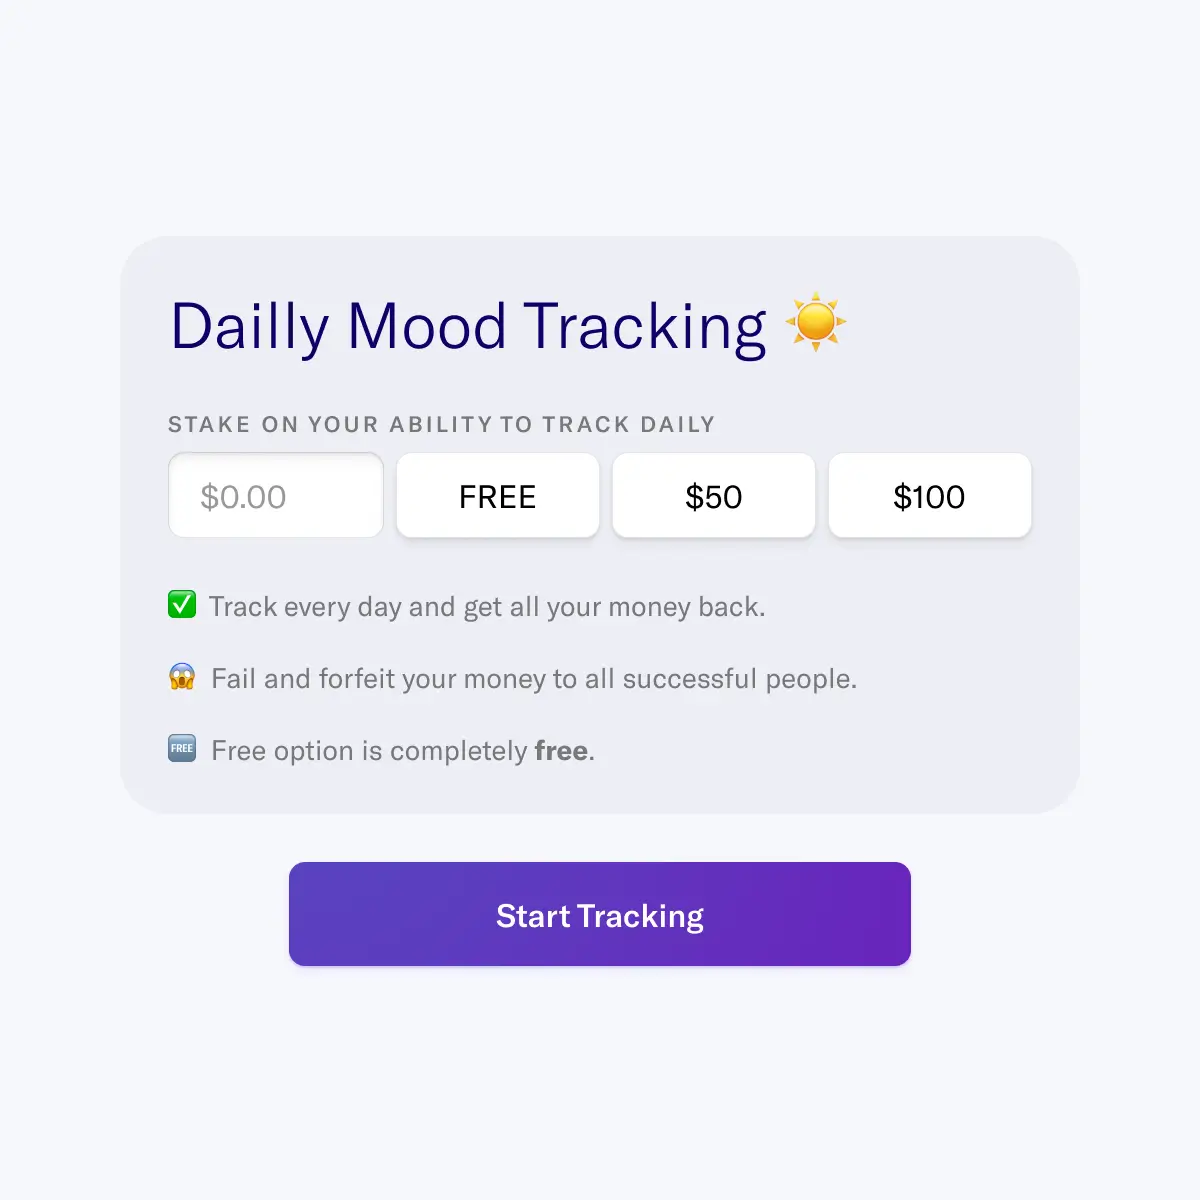 Commit to tracking every day by adding an optional pledge or just do it free without the bonus motivation